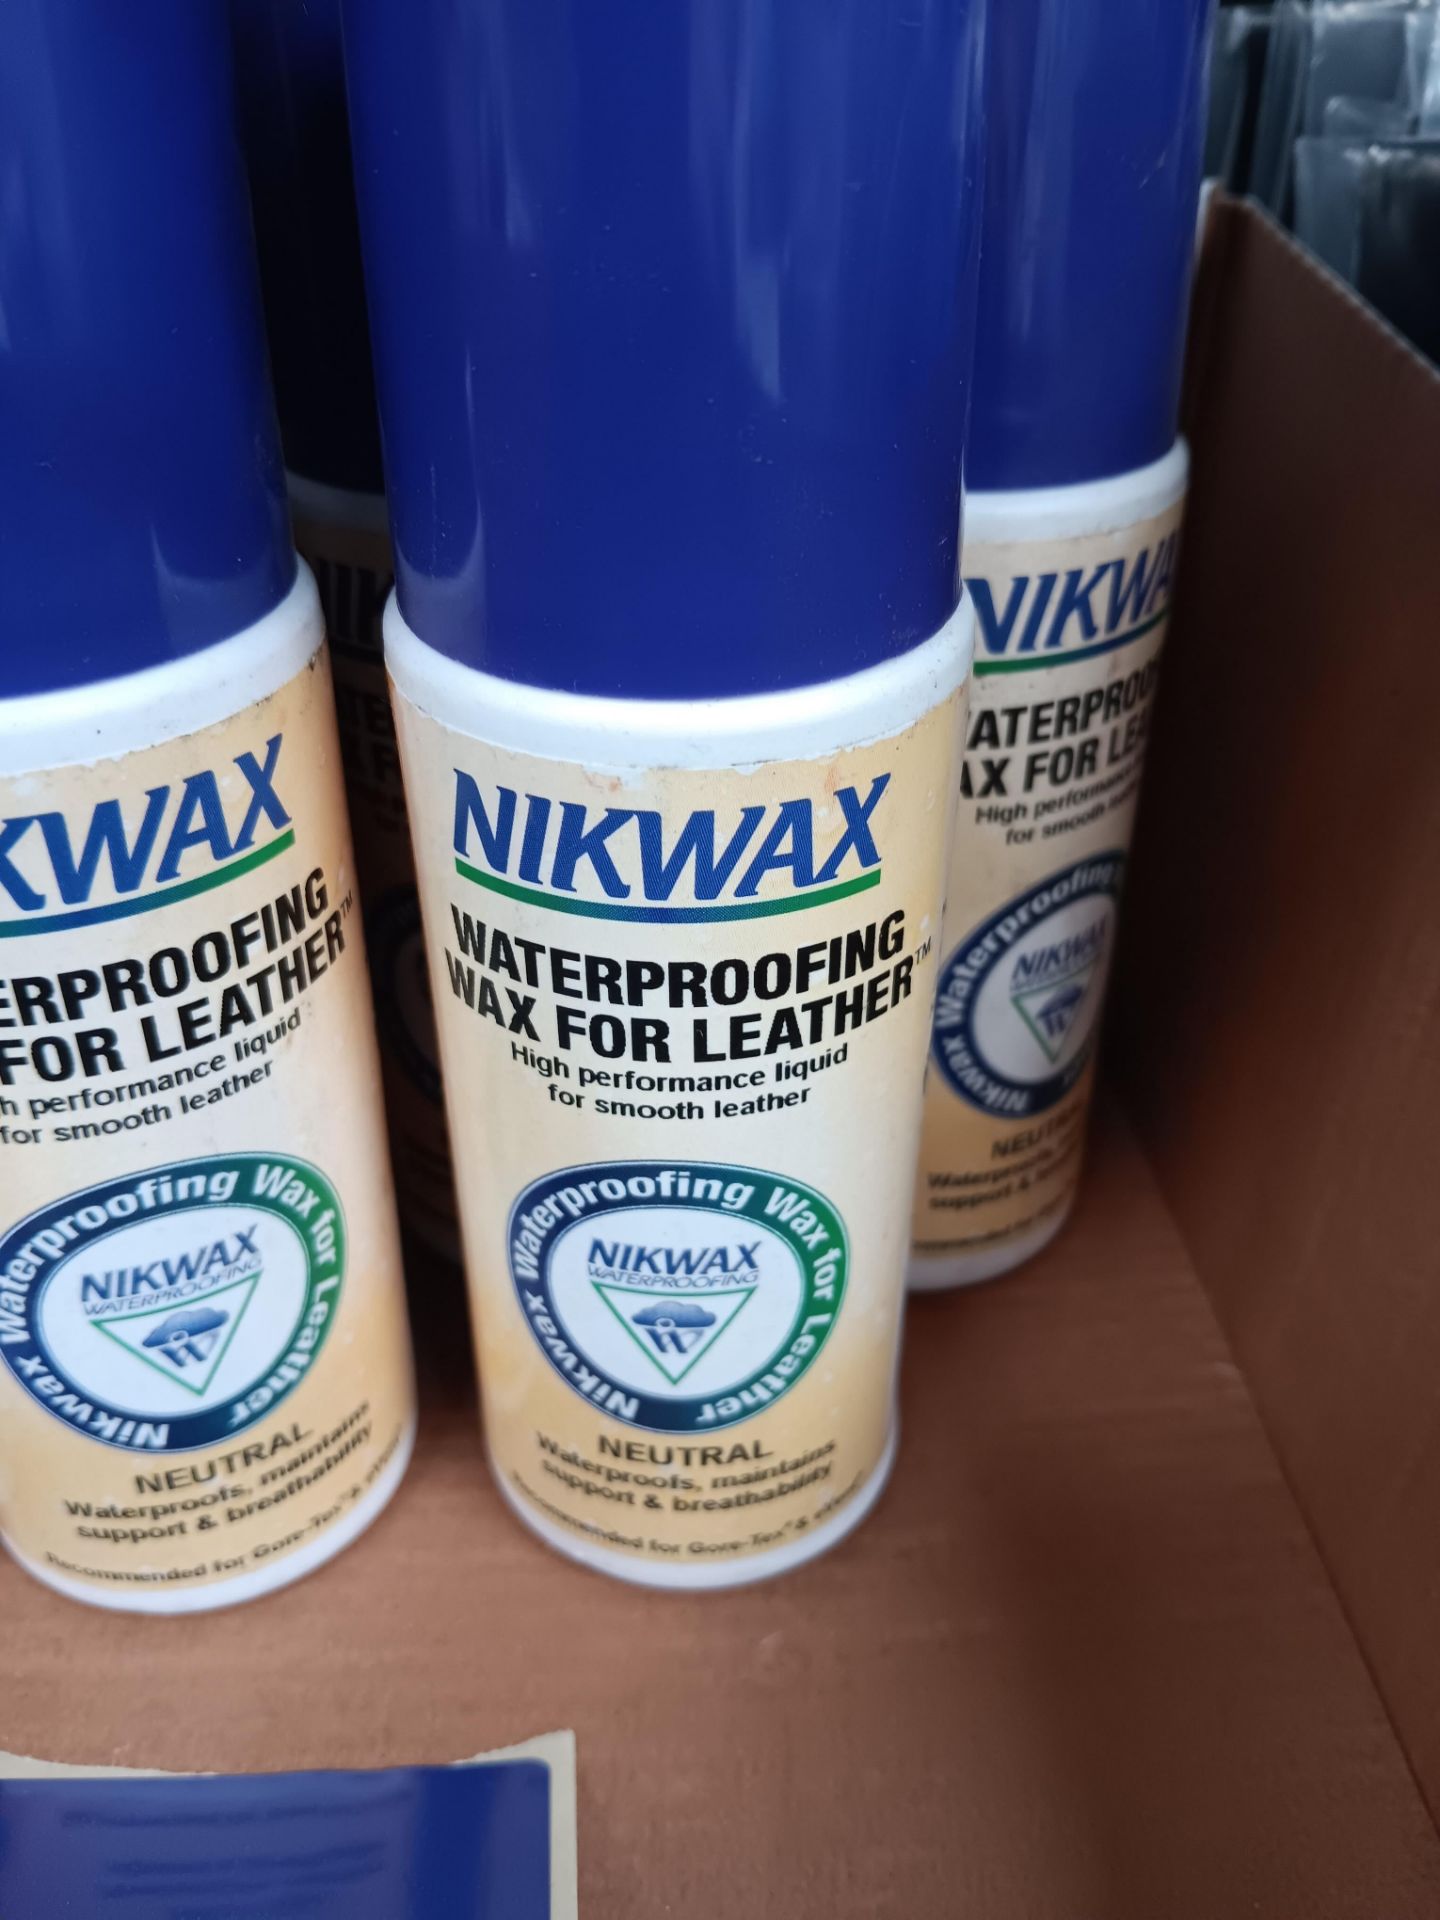 7 x Nikwax Waterproofing Wax for Leather (Please note, Viewing Strongly Recommended - Eddisons - Bild 2 aus 2